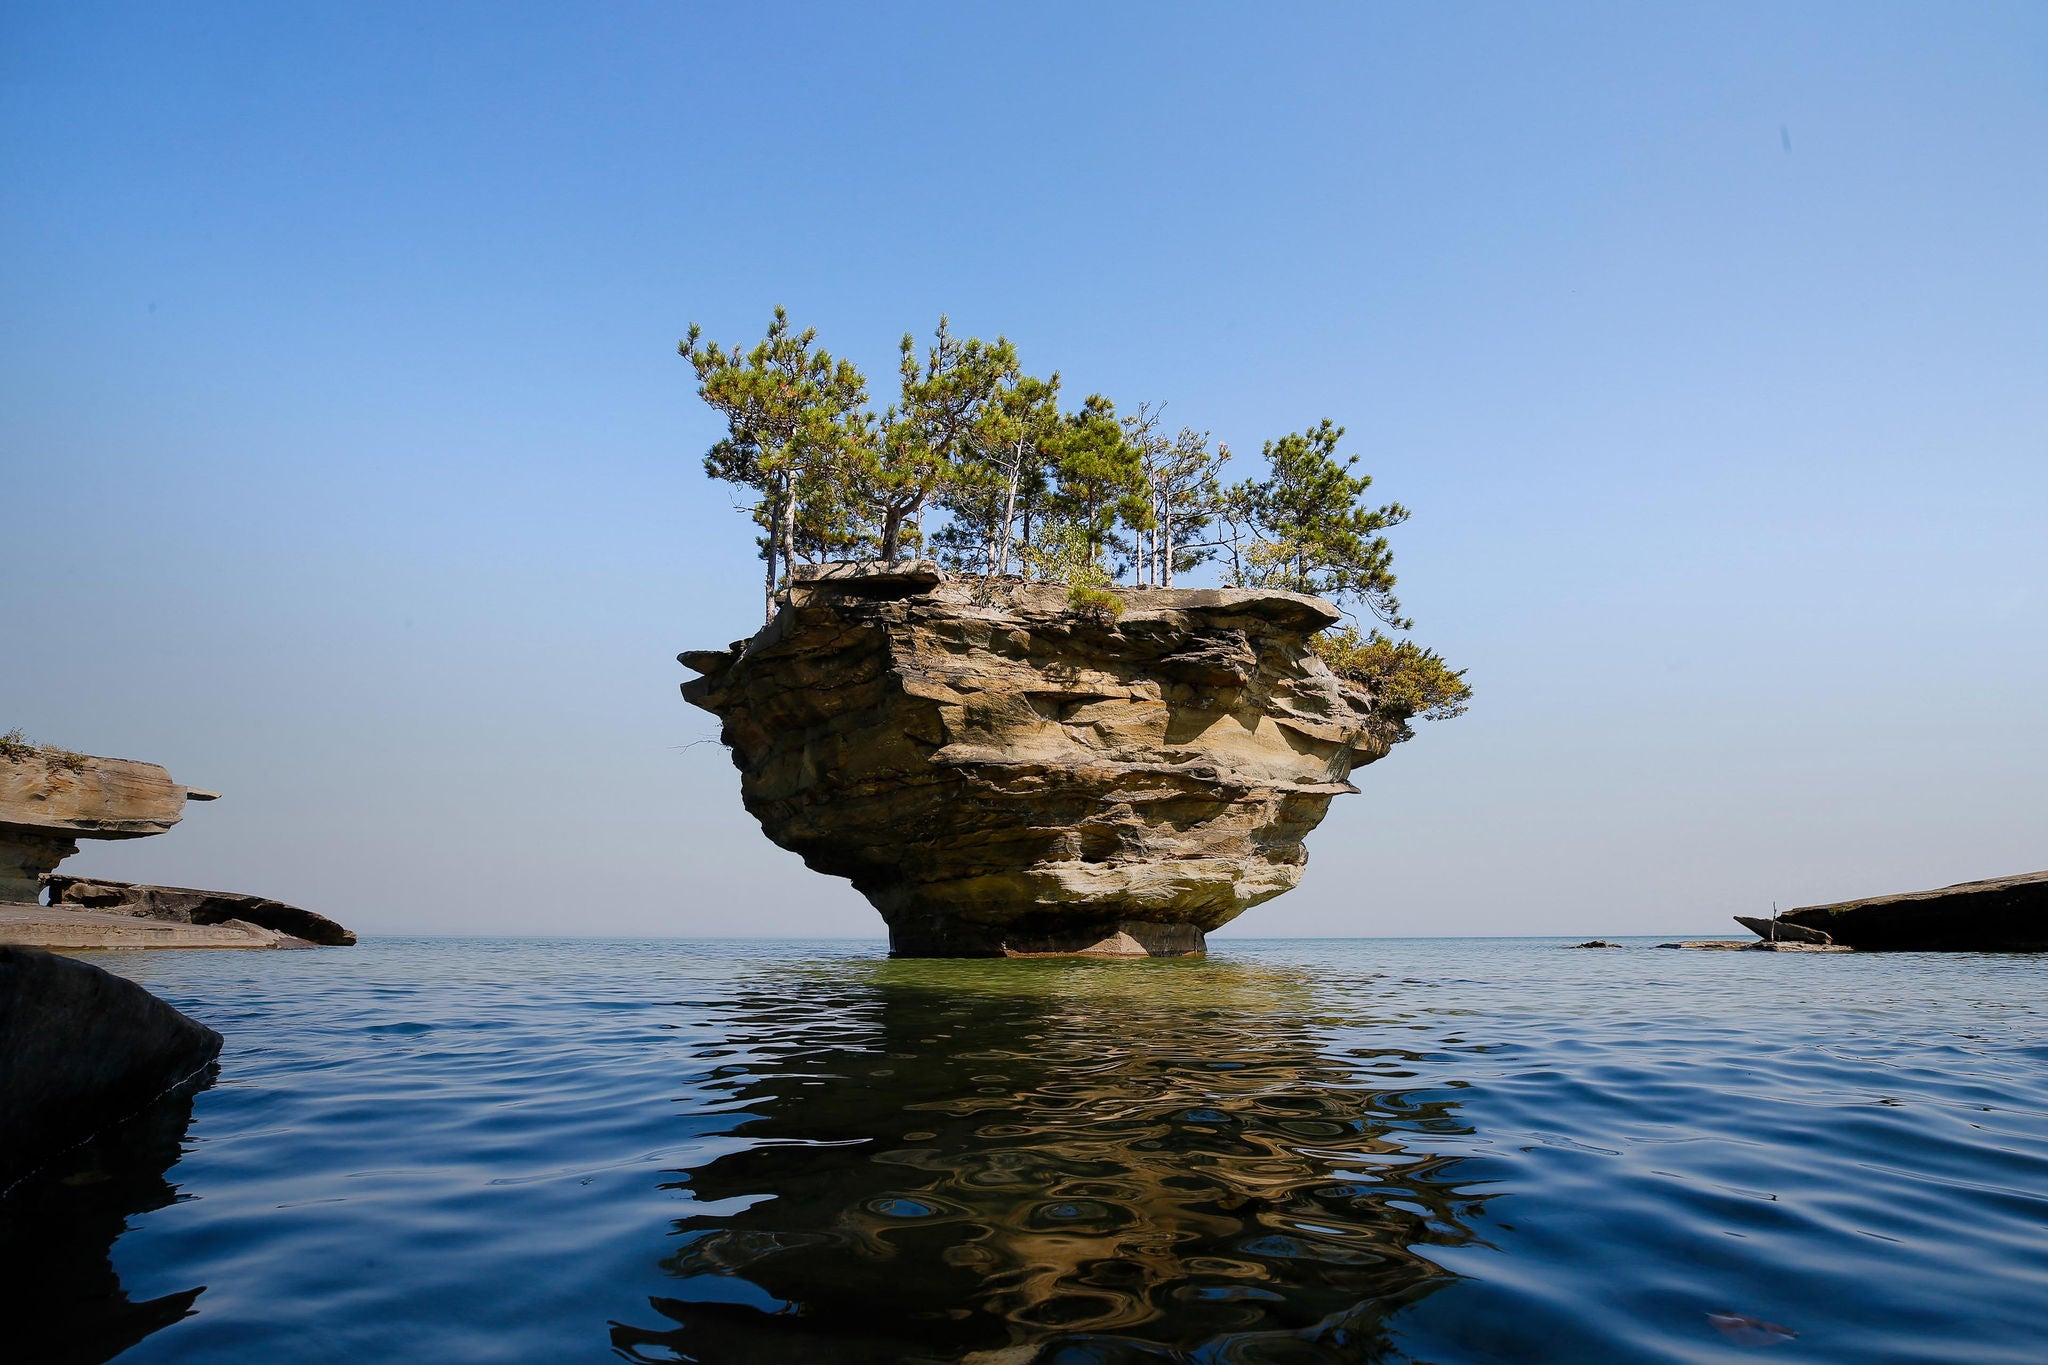 Turnip rock, a geological rock formation stands in Lake Huron near Port Austin, Michigan